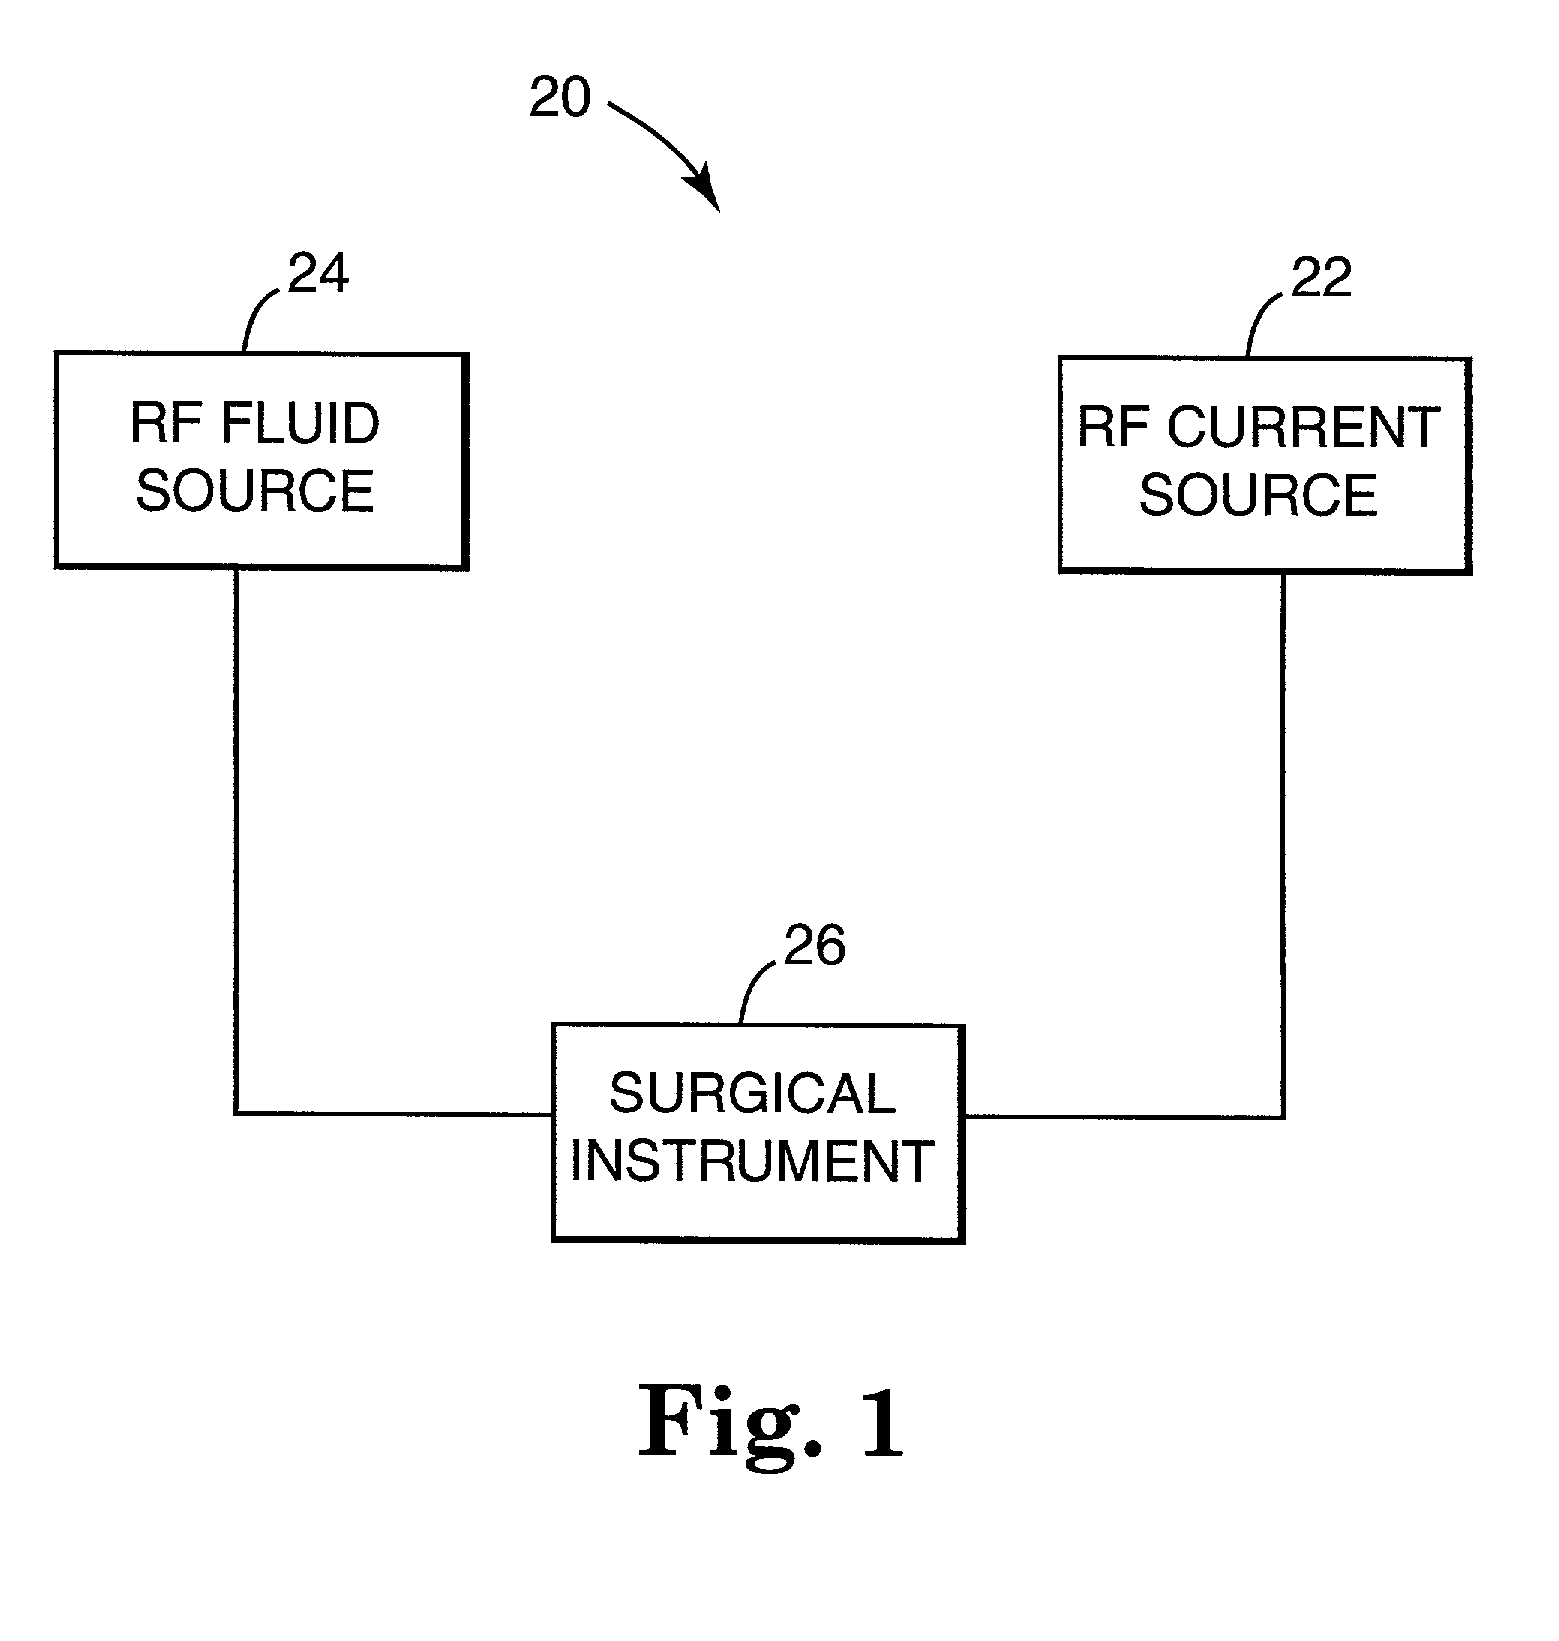 Helical needle apparatus for creating a virtual electrode used for the ablation of tissue